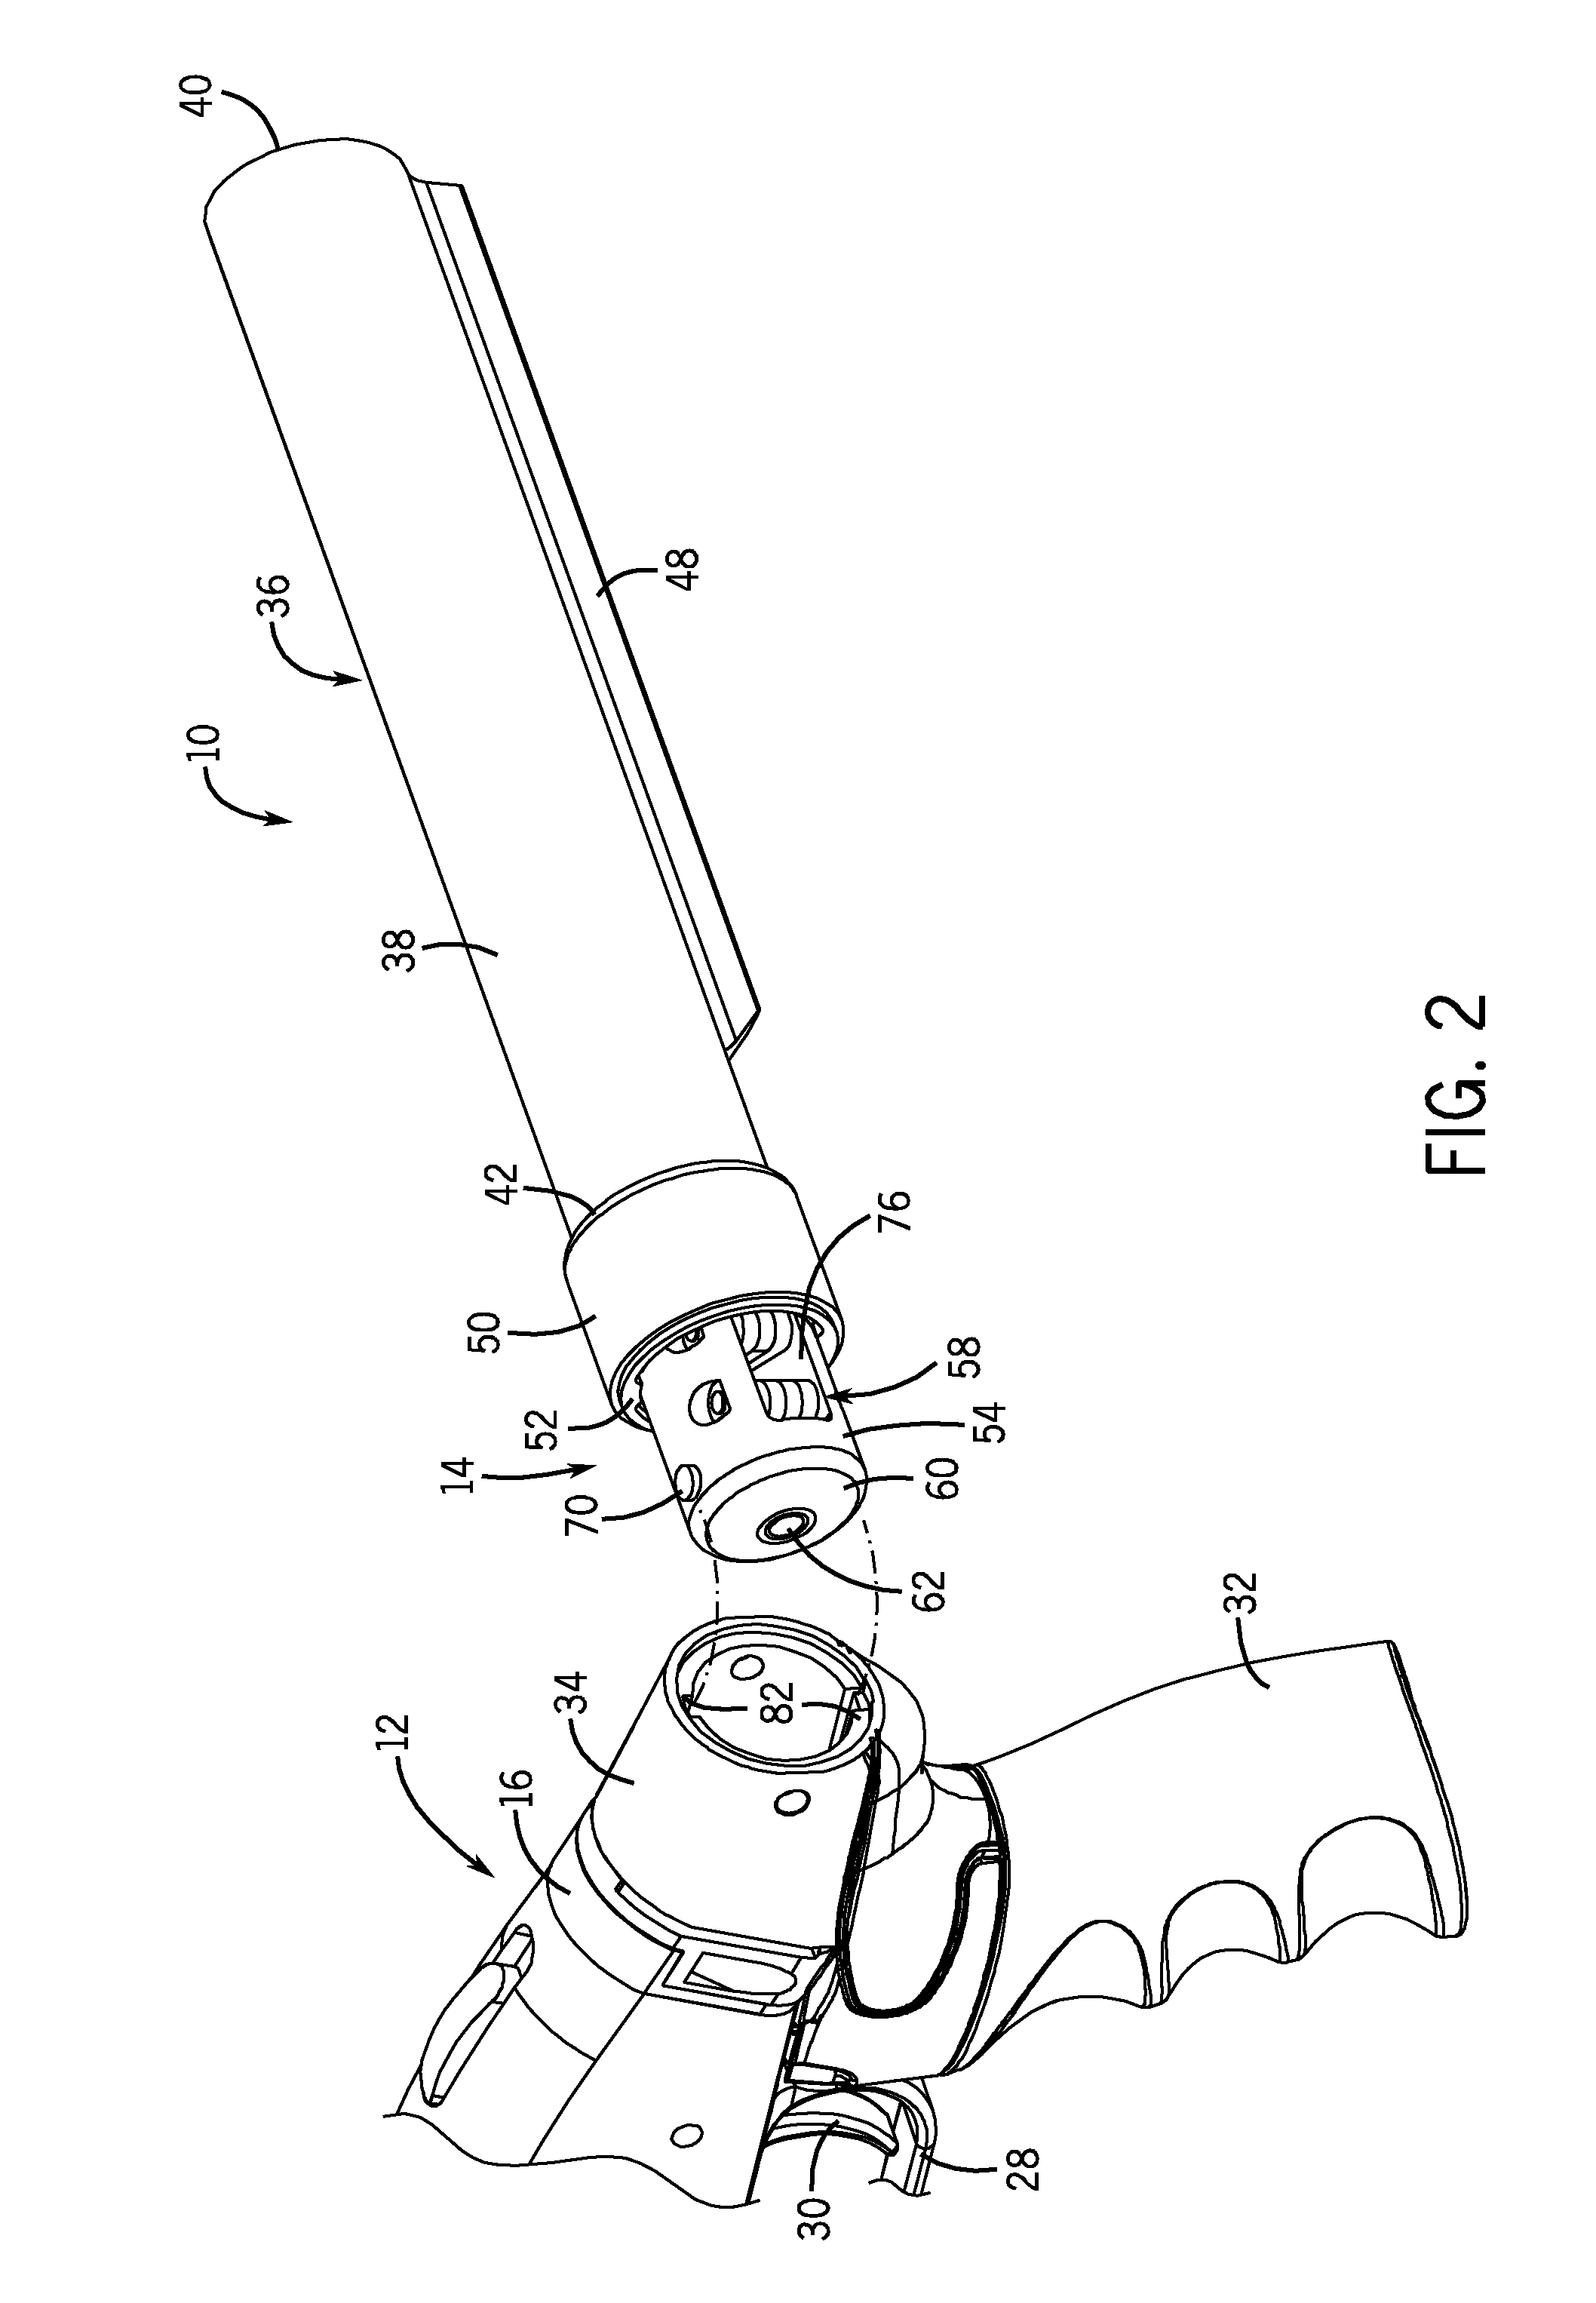 Side folding stock assembly with concealed hinge arrangement